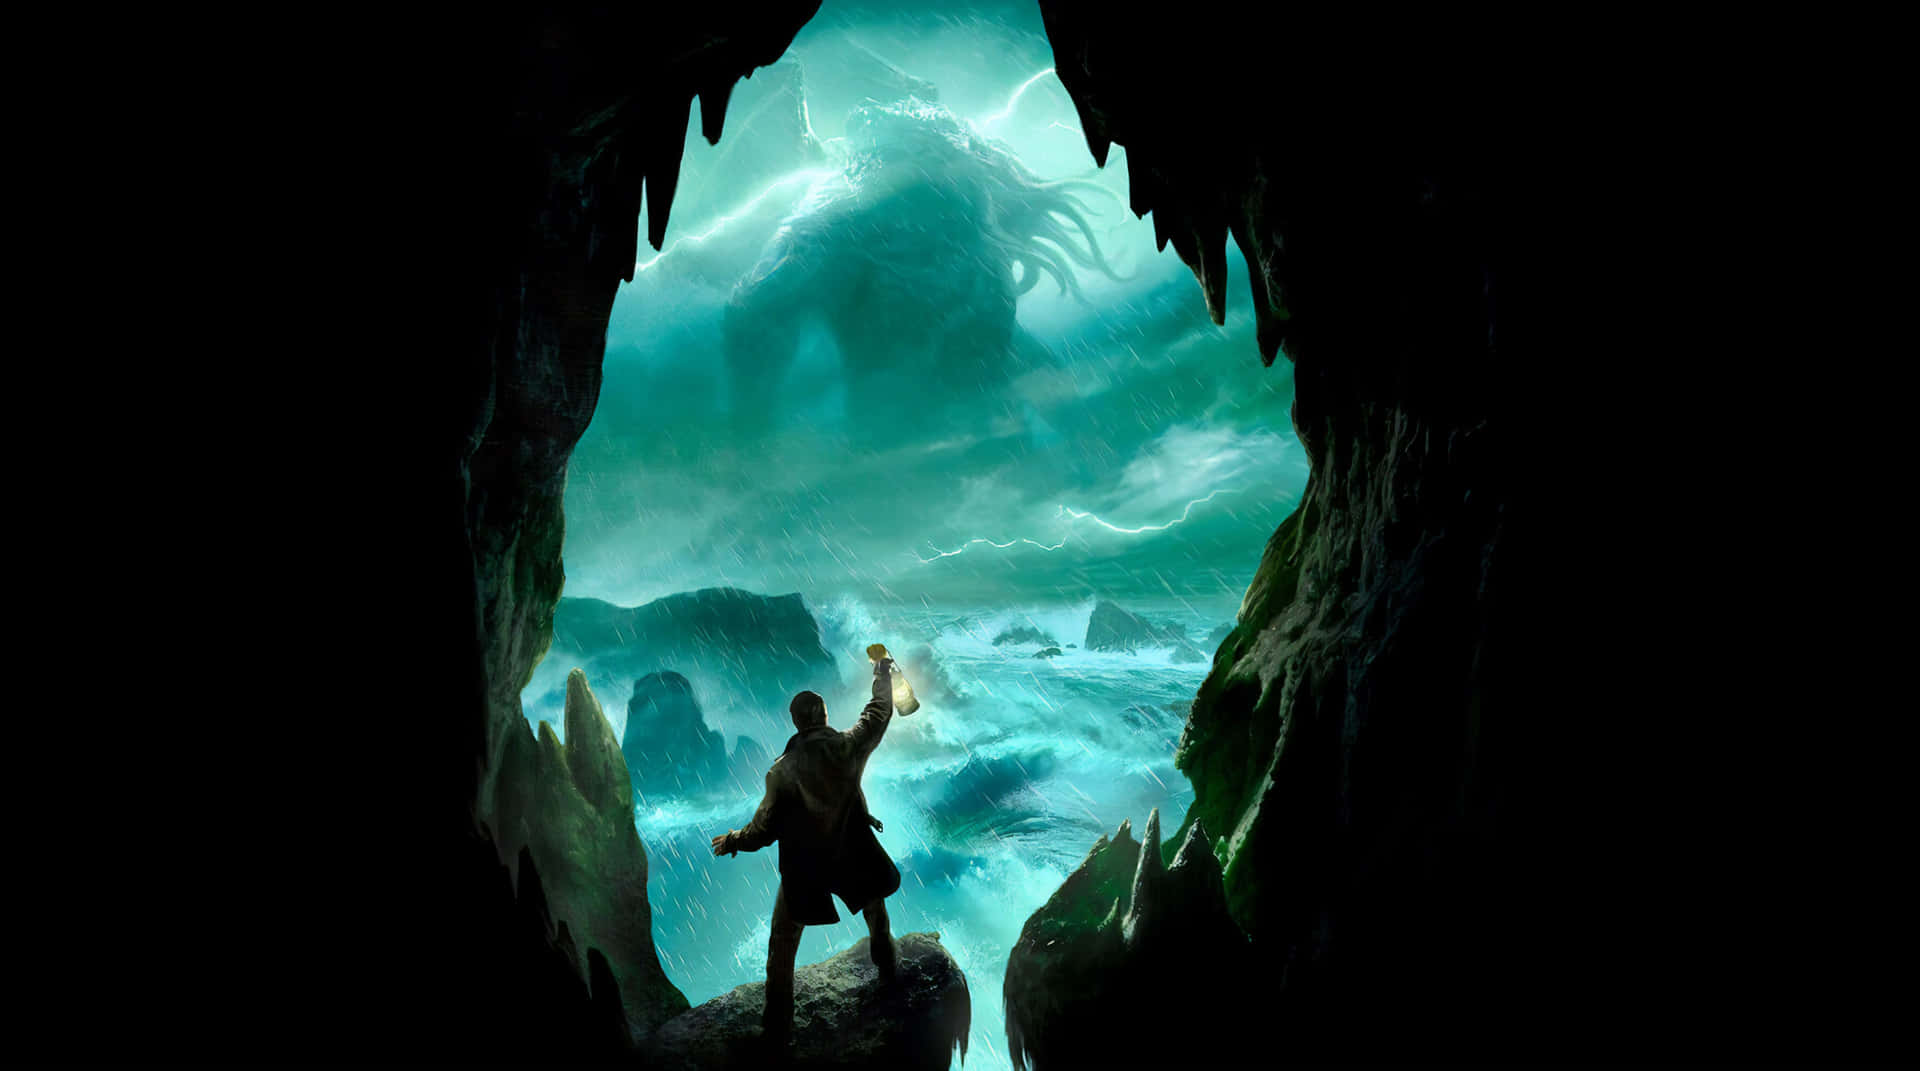 A Man Is Standing In A Cave Looking At The Ocean